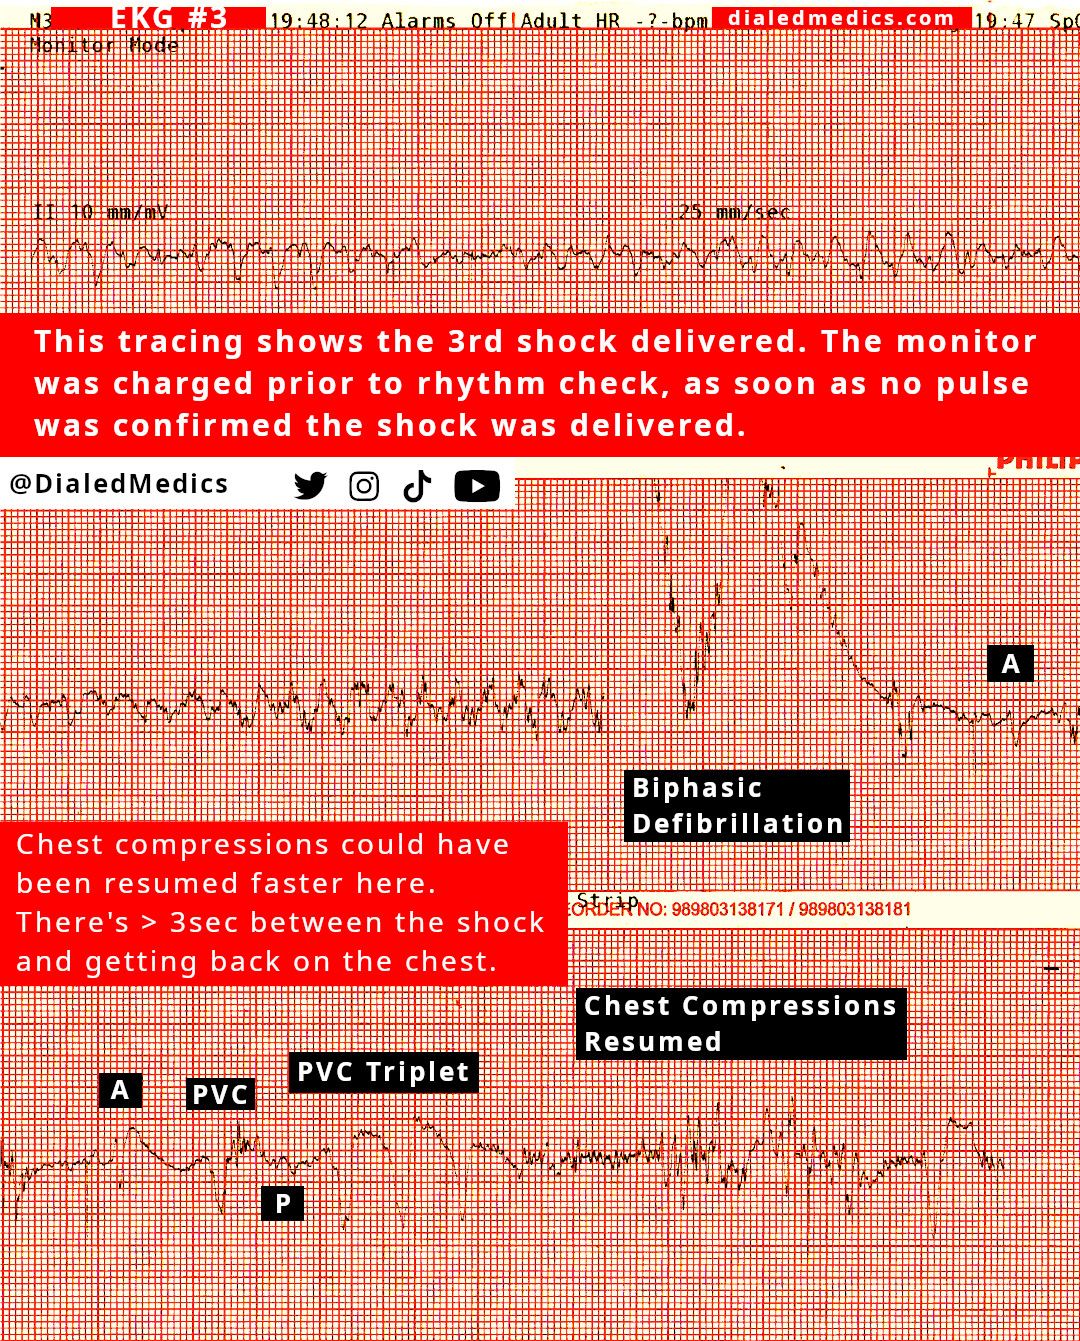 EKG #3 showing biphasic defibrillation #3 with an electrical conversion after.